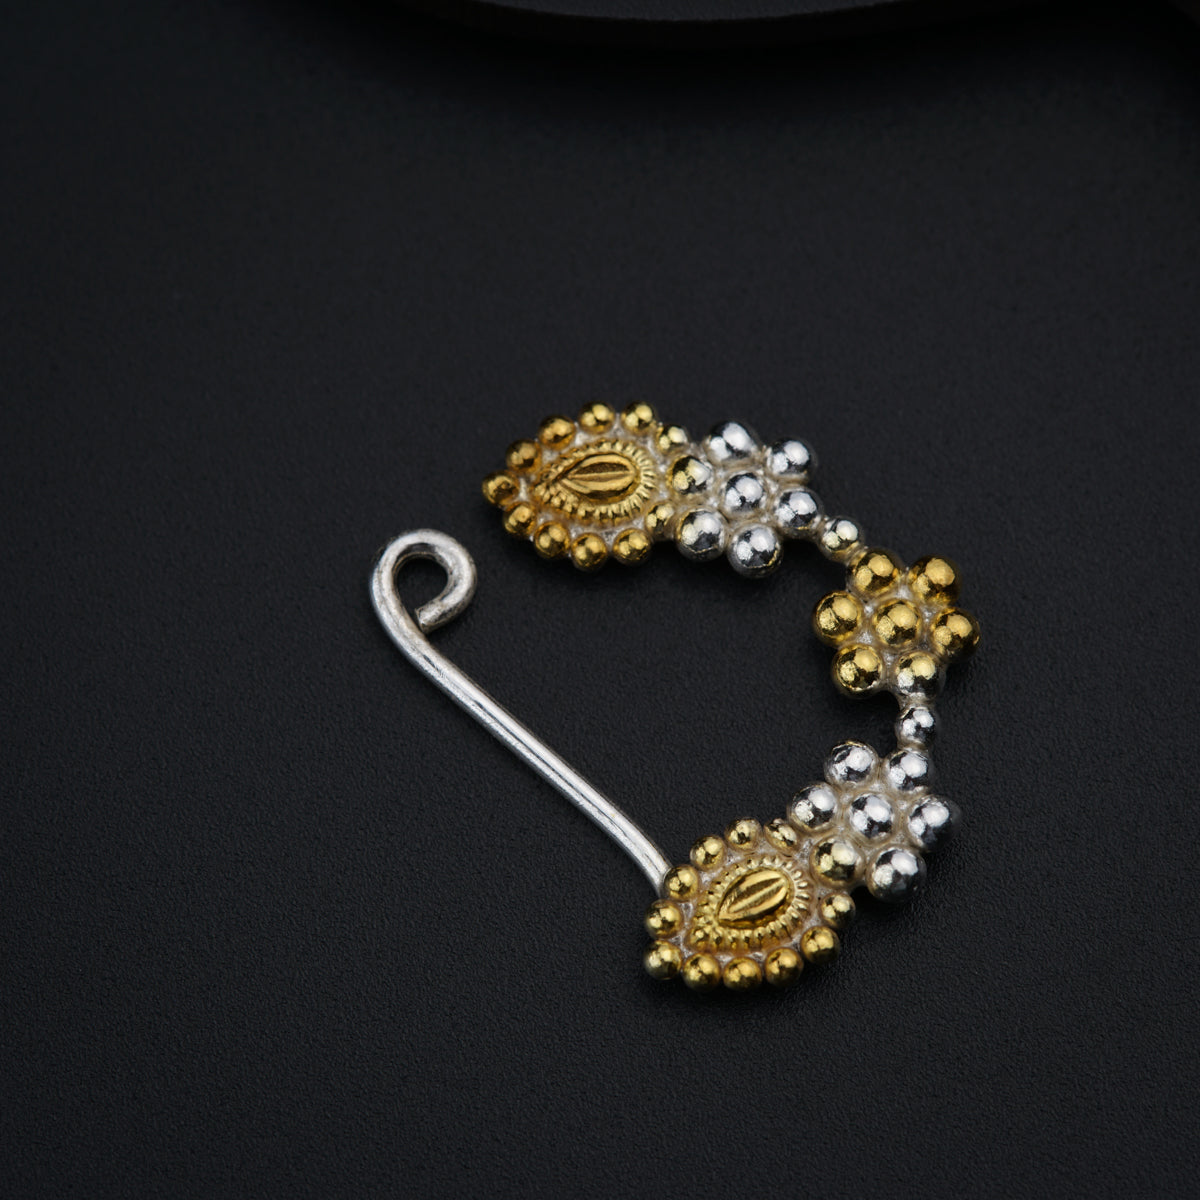 a pair of gold and silver earrings on a black surface